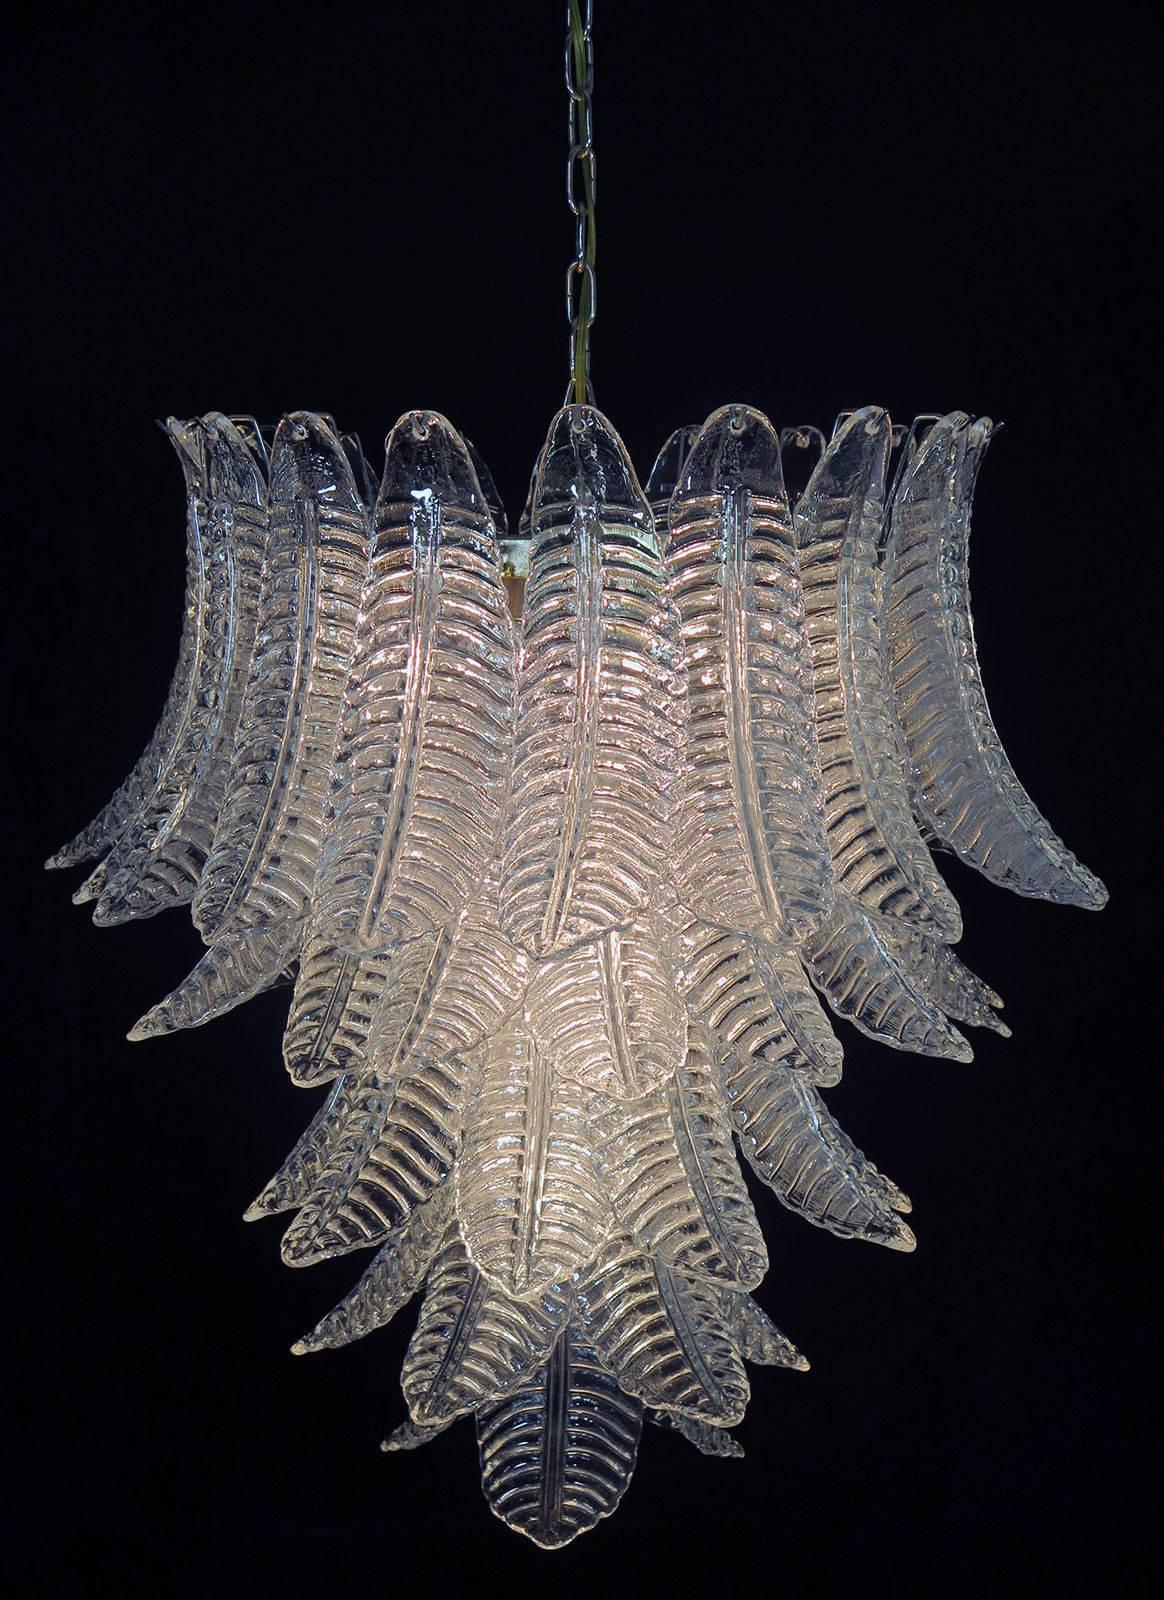 Pair of Italian Leaves Chandeliers, Barovier & Toso Style, Murano 1